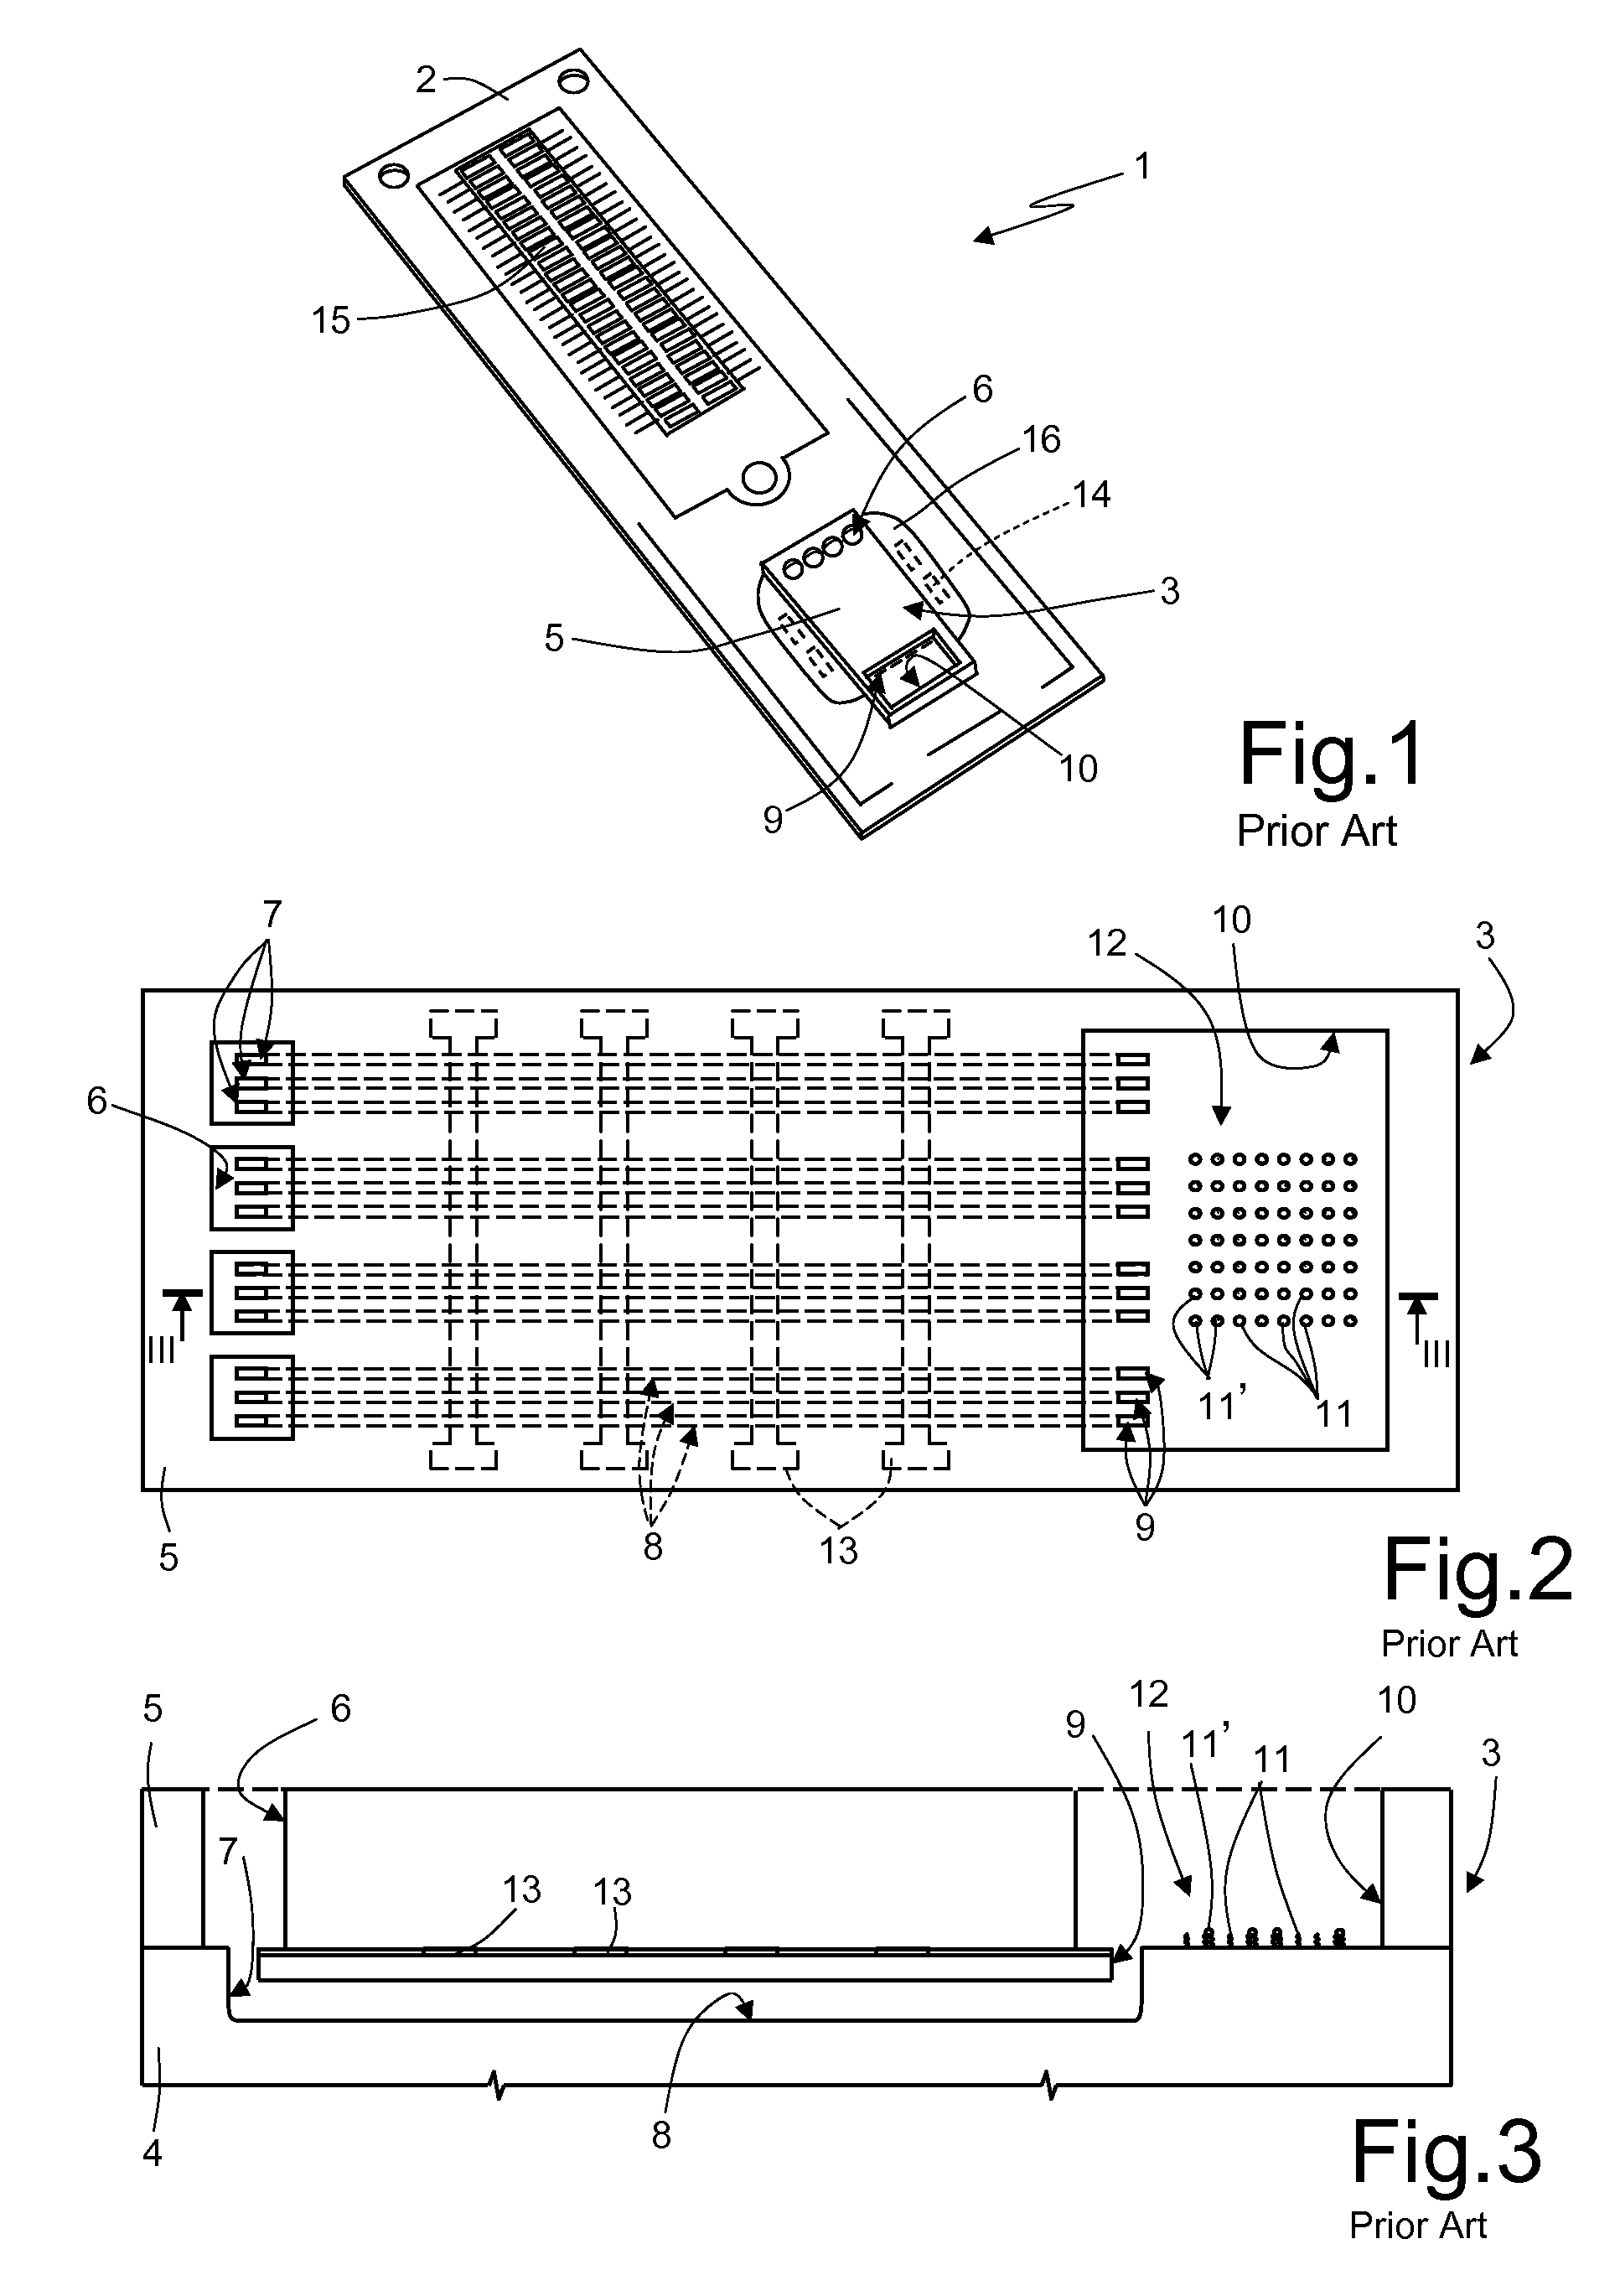 Assembly of a microfluidic device for analysis of biological material